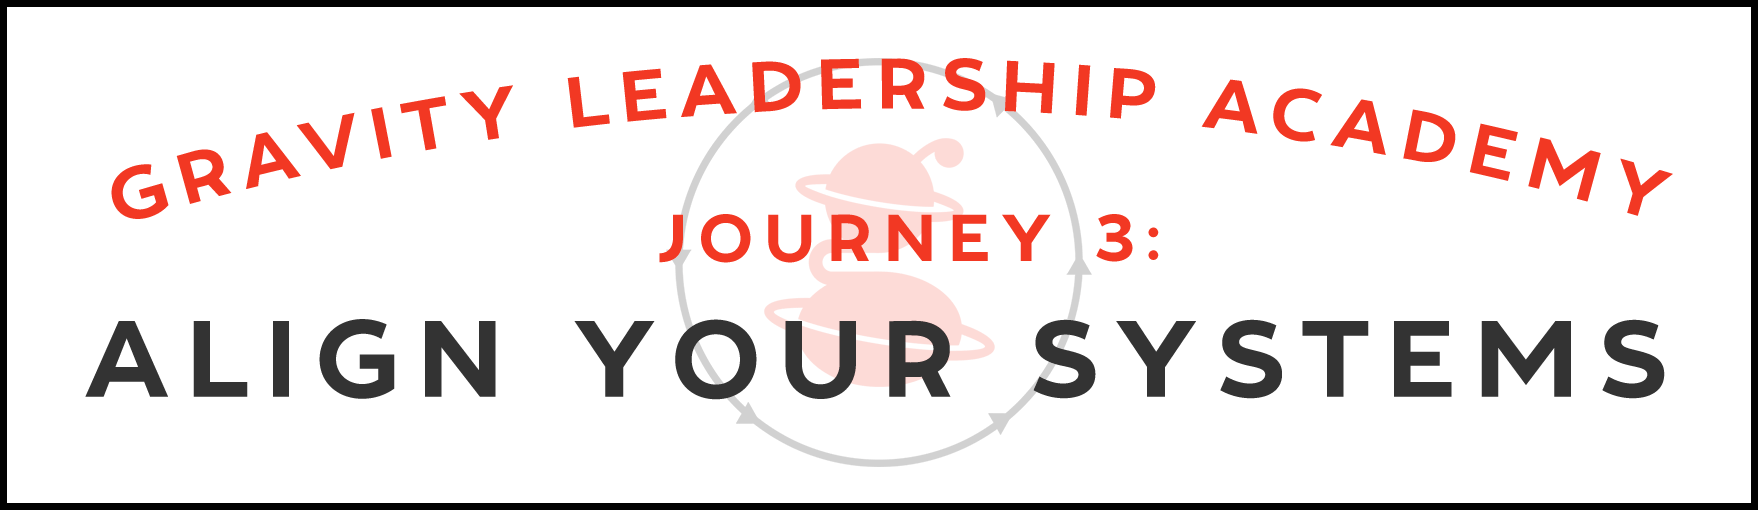 Gravity Leadership Academy: Align Your Systems